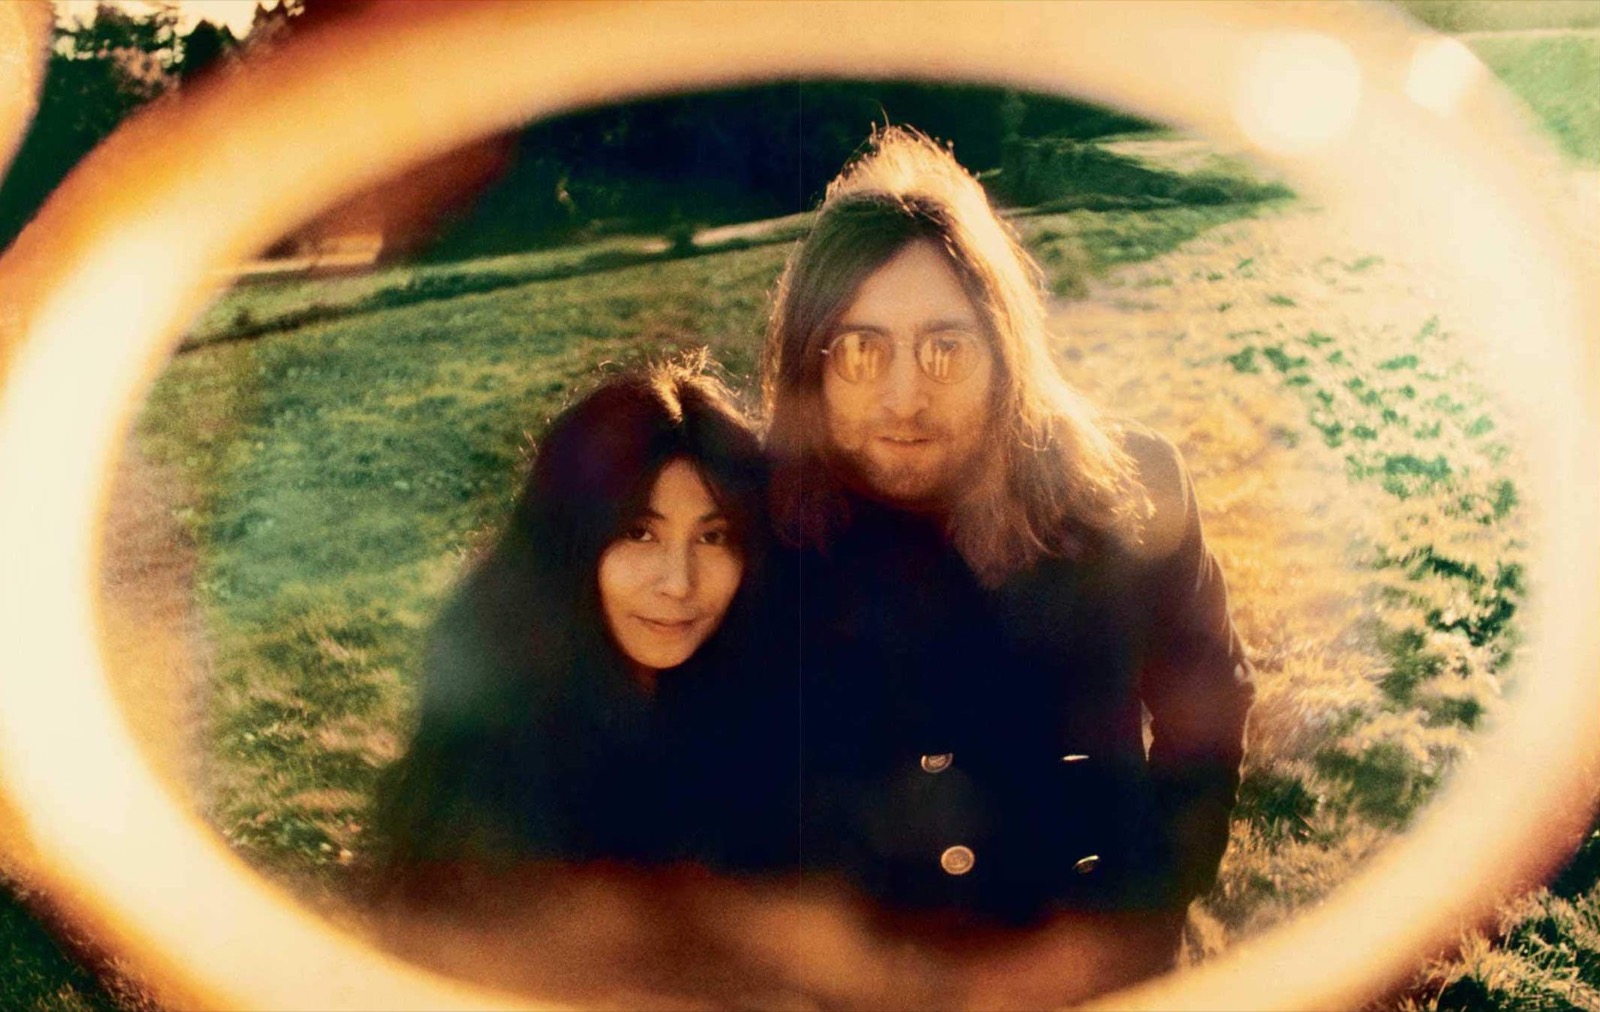 Answer These 22 Questions to Find Out If You Have Enough General Knowledge John Lennon Yoko Ono